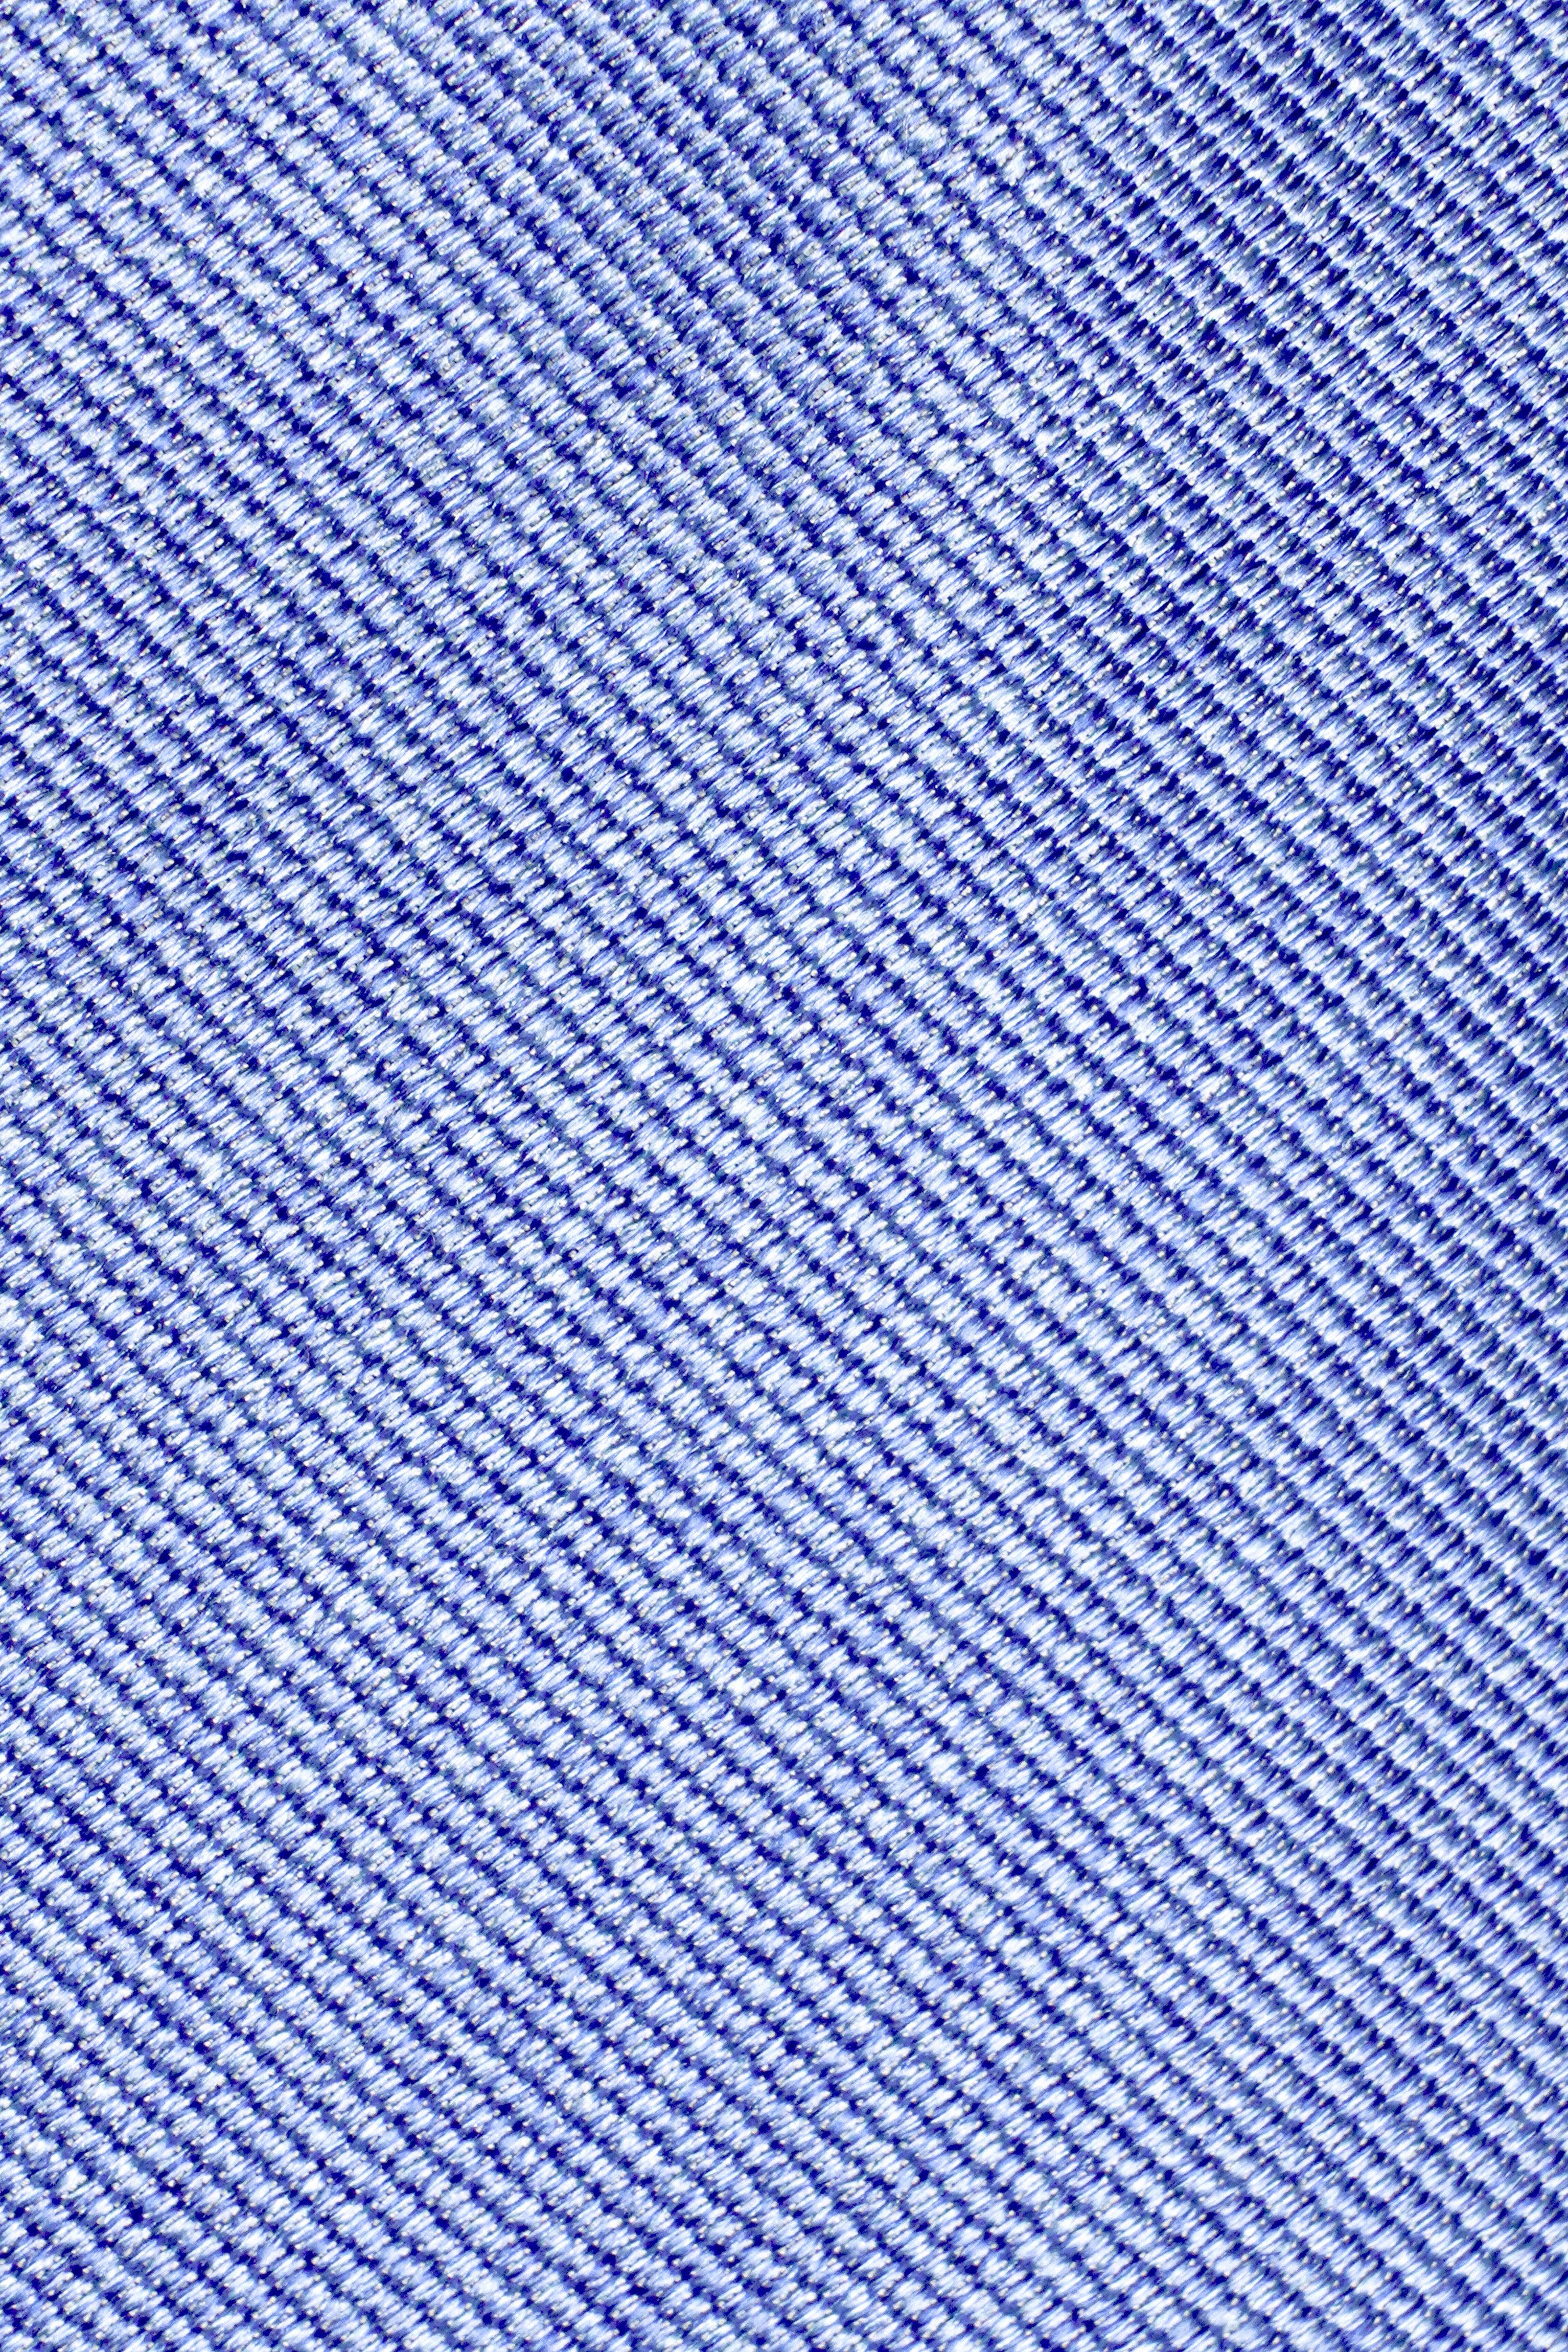 Alt view 2 Bowman Solid Woven Tie in Palace Blue